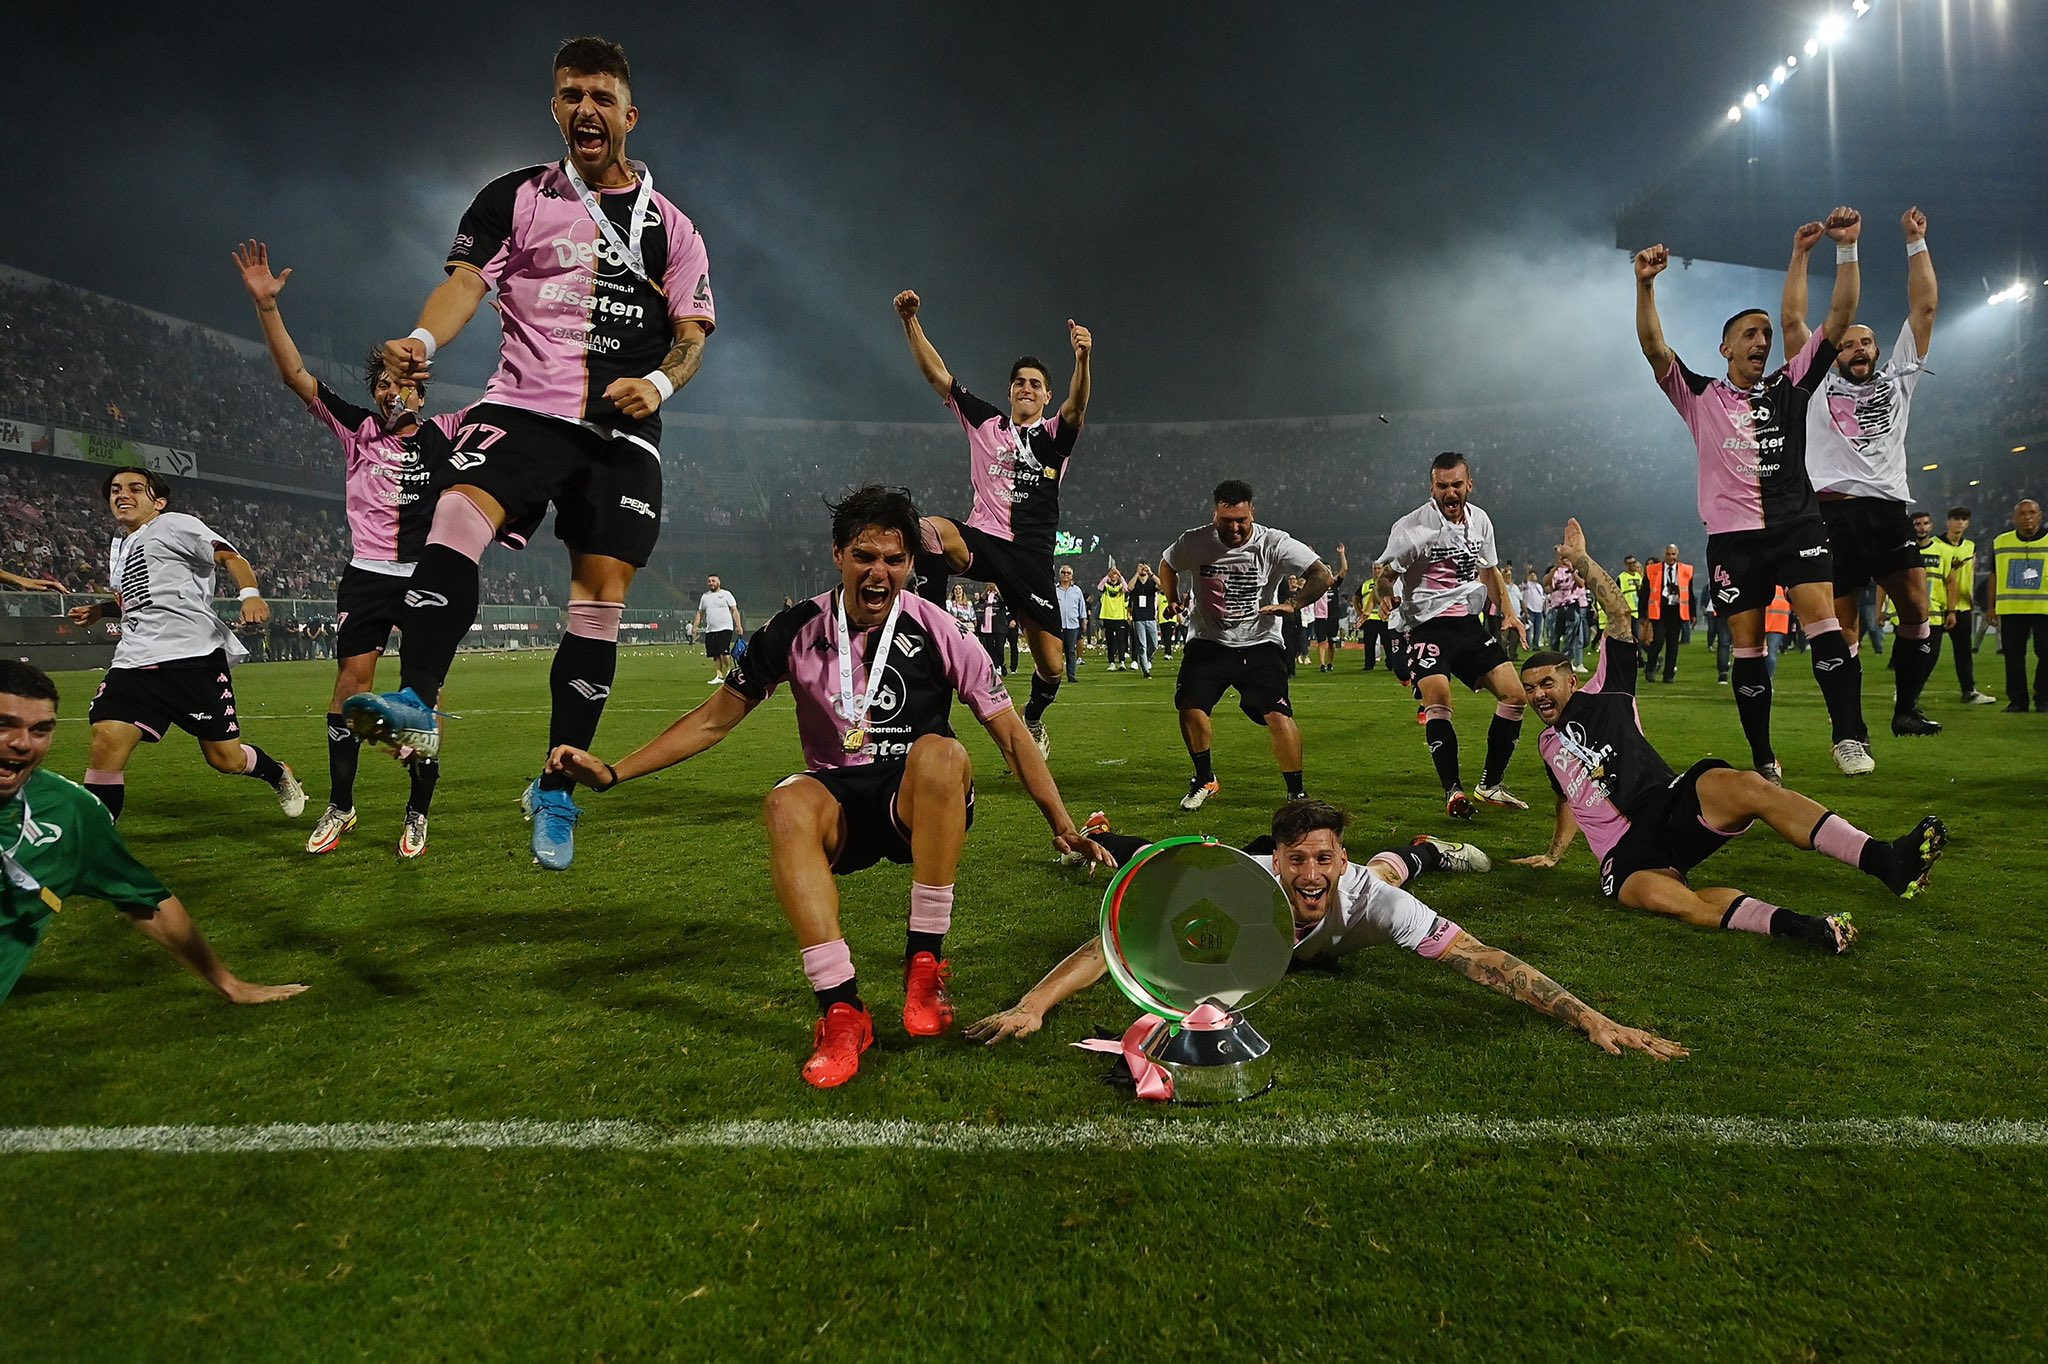 Reports | City Football Group closing in on deal to buy Serie B club Palermo